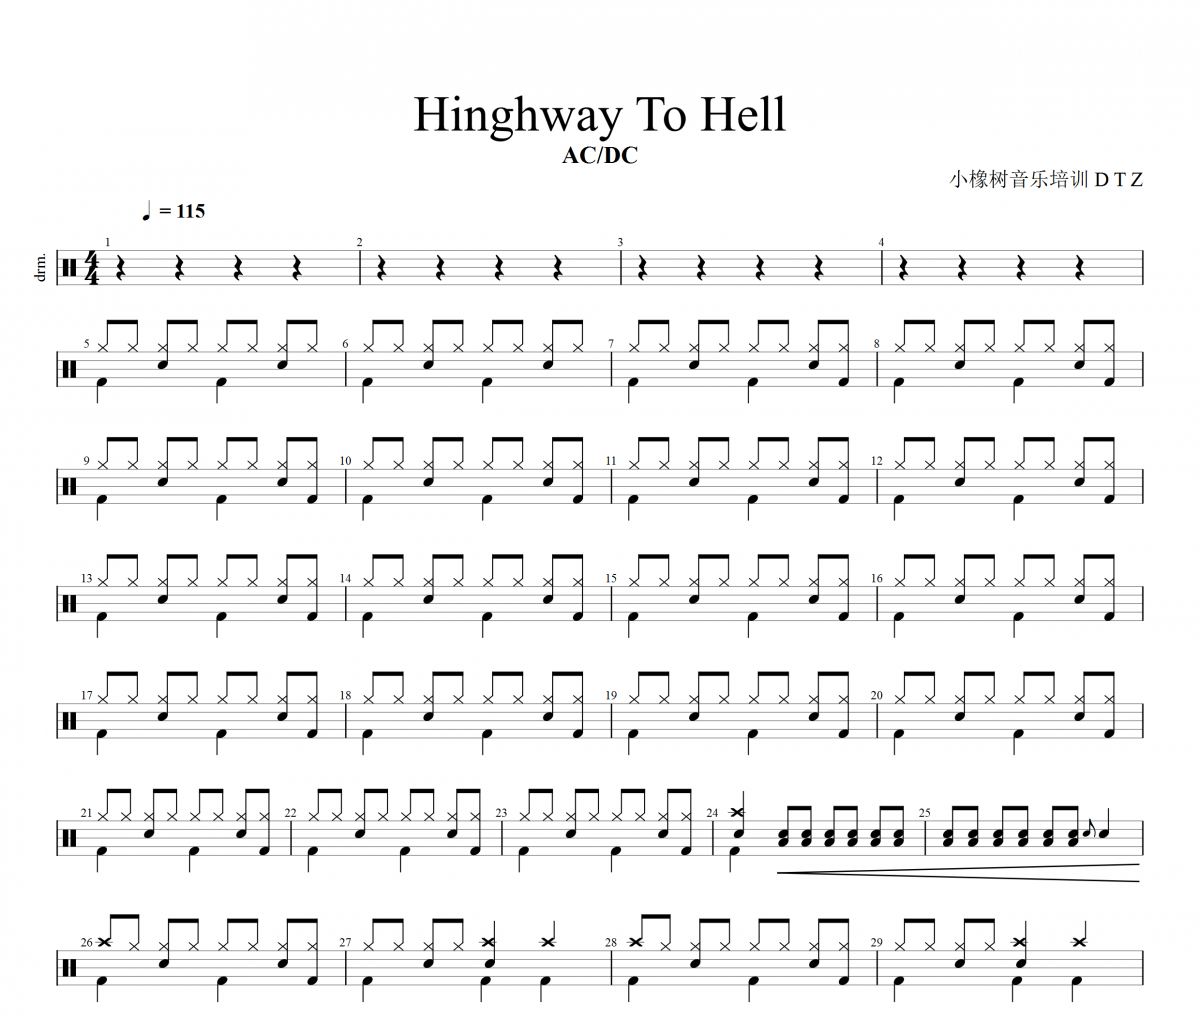 Hinghway To Hell鼓谱 AC/DC《Hinghway To Hell》架子鼓|爵士鼓|鼓谱+动态视频